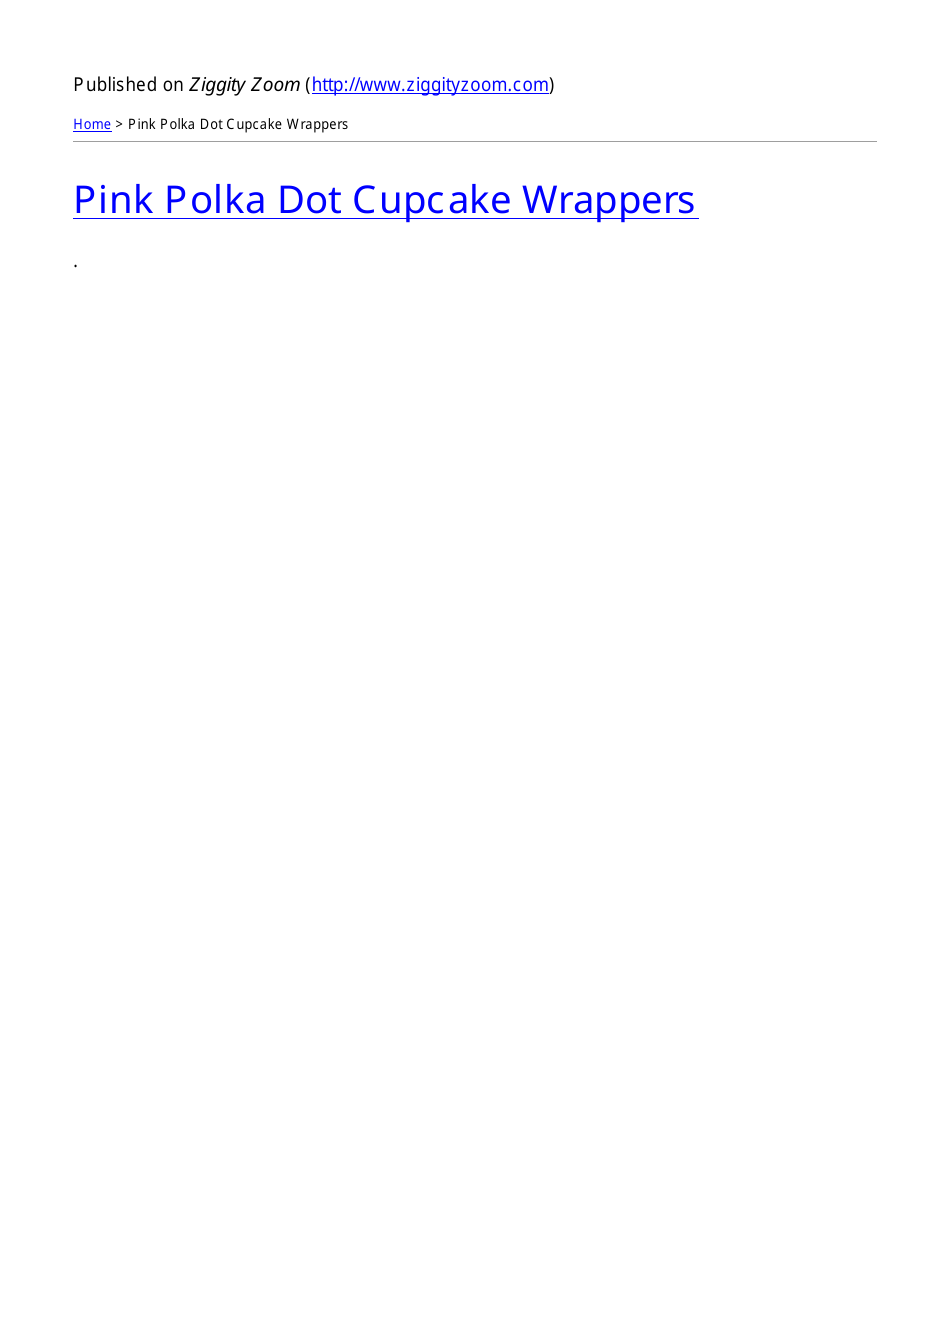 Pink polka dot cupcake wrapper template - Printable party adornment